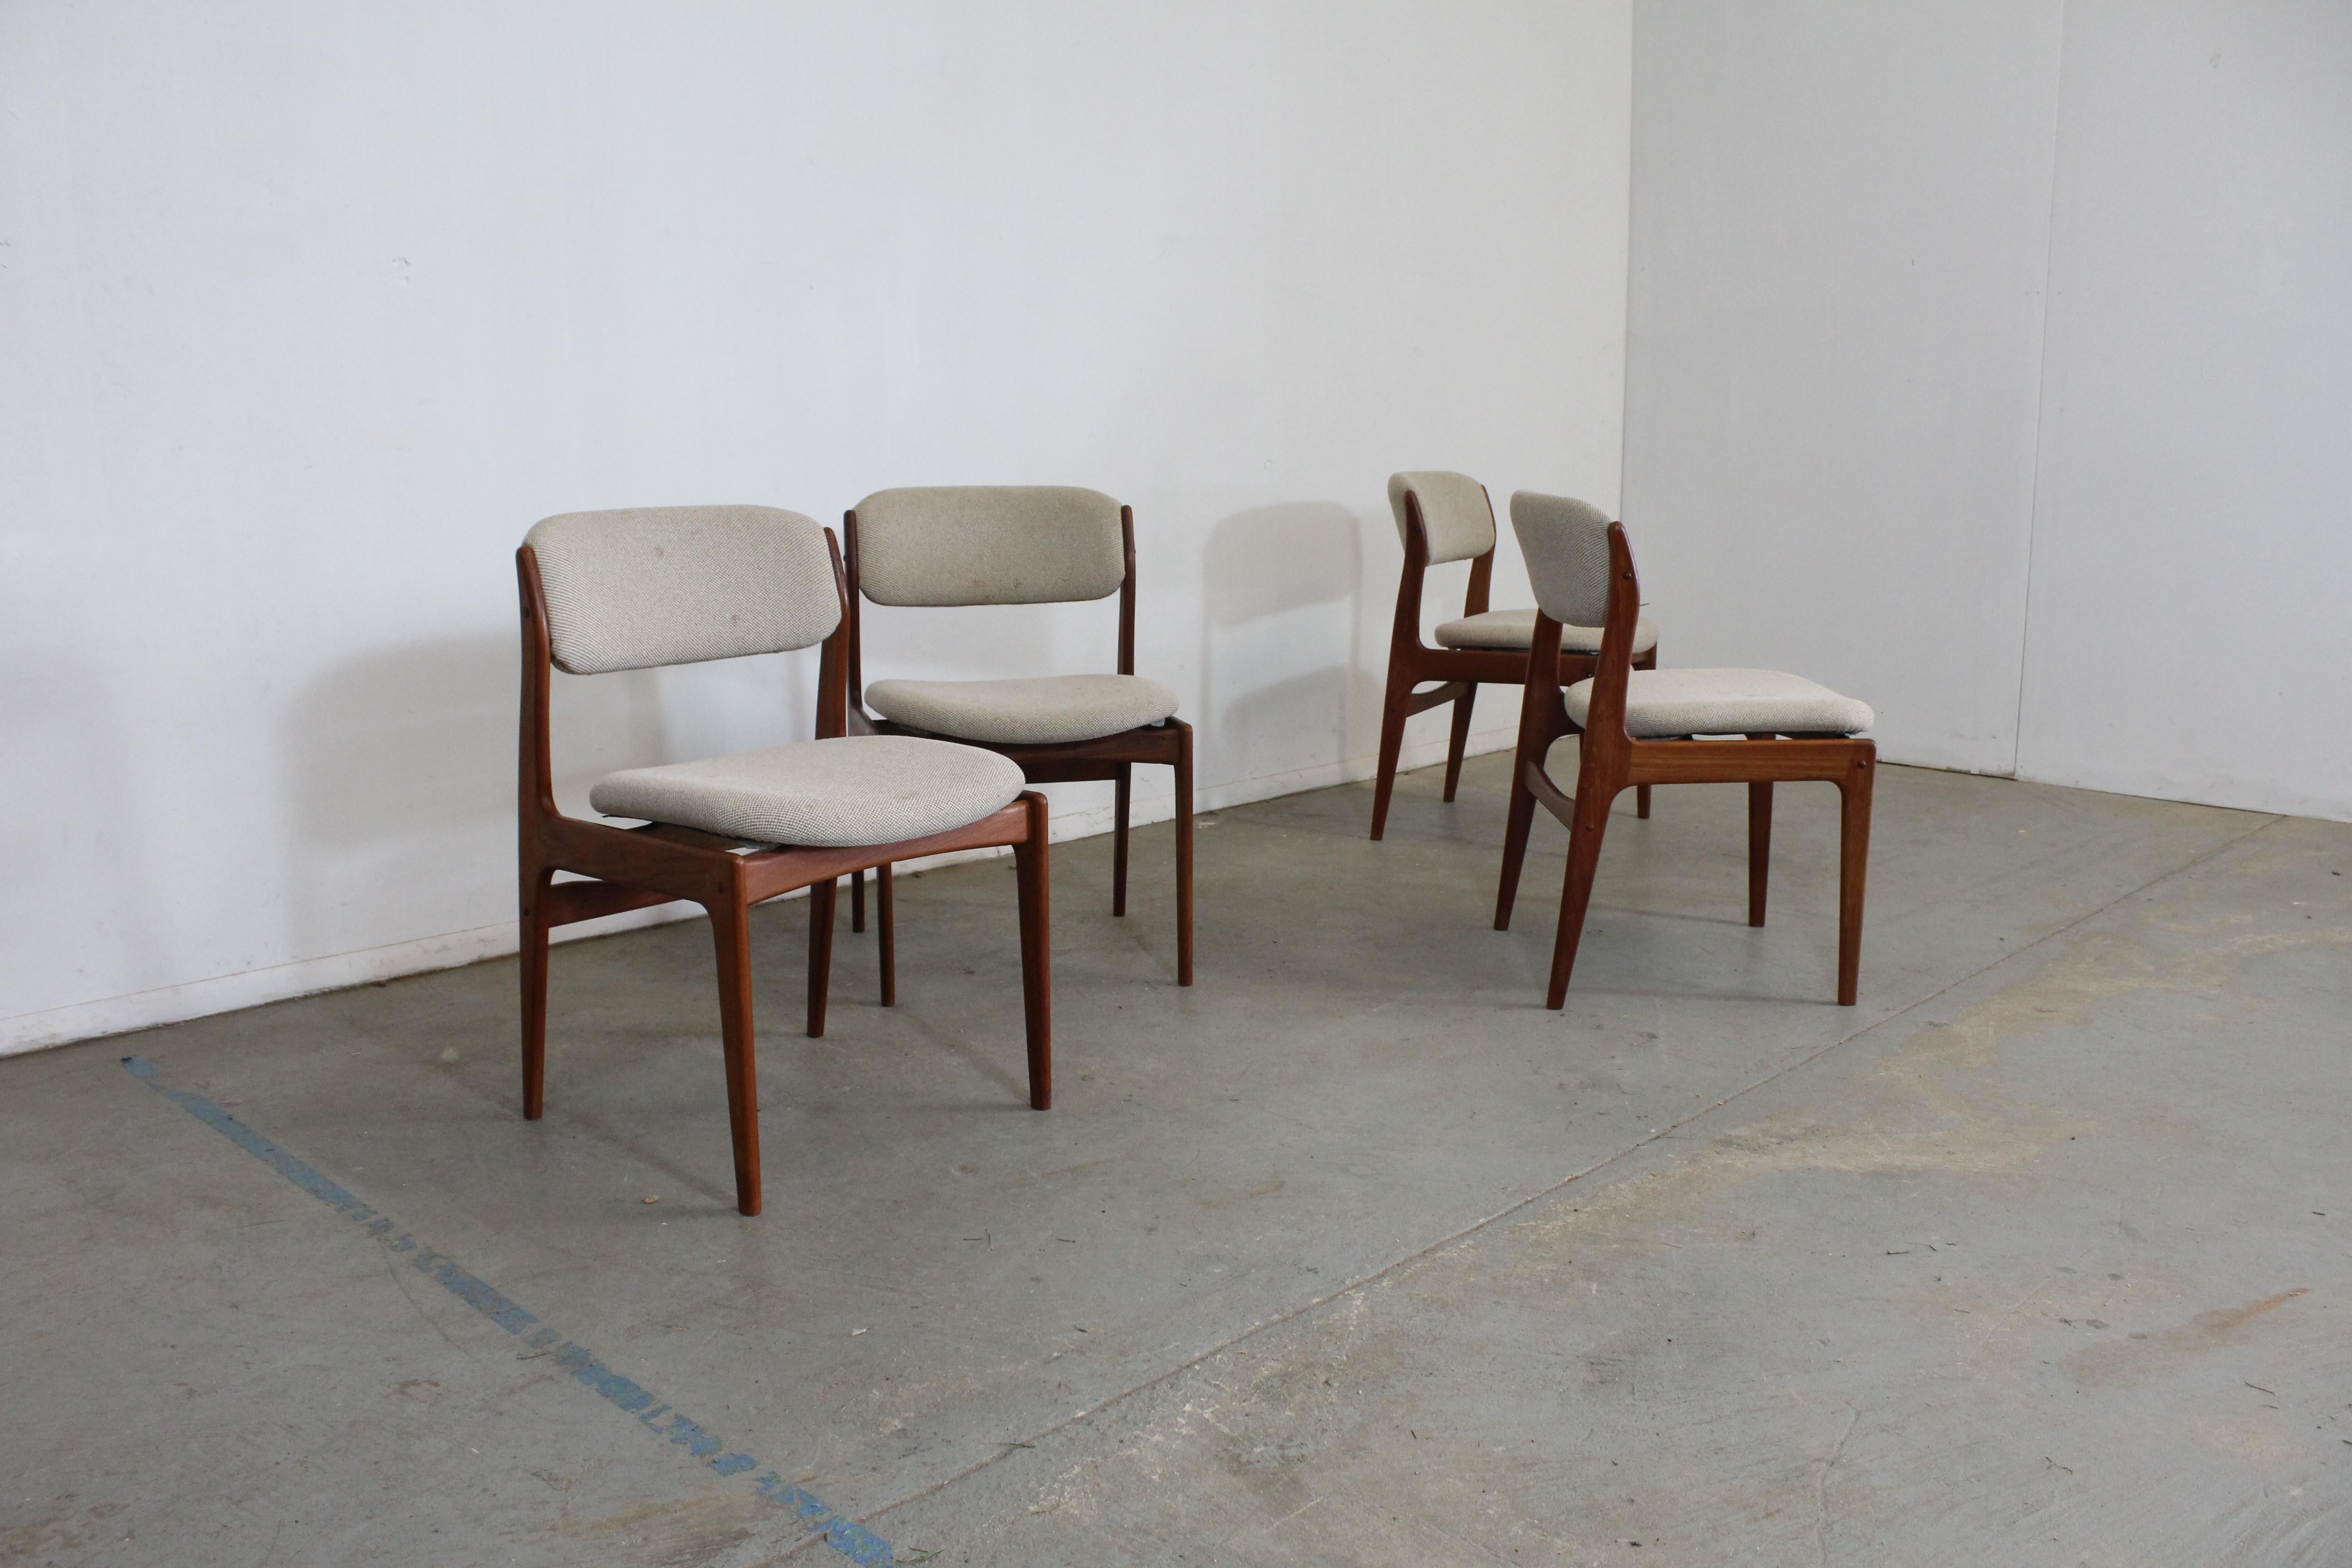 Set of 4 Mid-Century Modern teak side dining chairs 

Offered is a vintage set of 4 vintage Mid-Century Modern teak side dining chairs with teak backs. They are in good vintage condition. Shows minor stains, surface scratches, age wear. They are